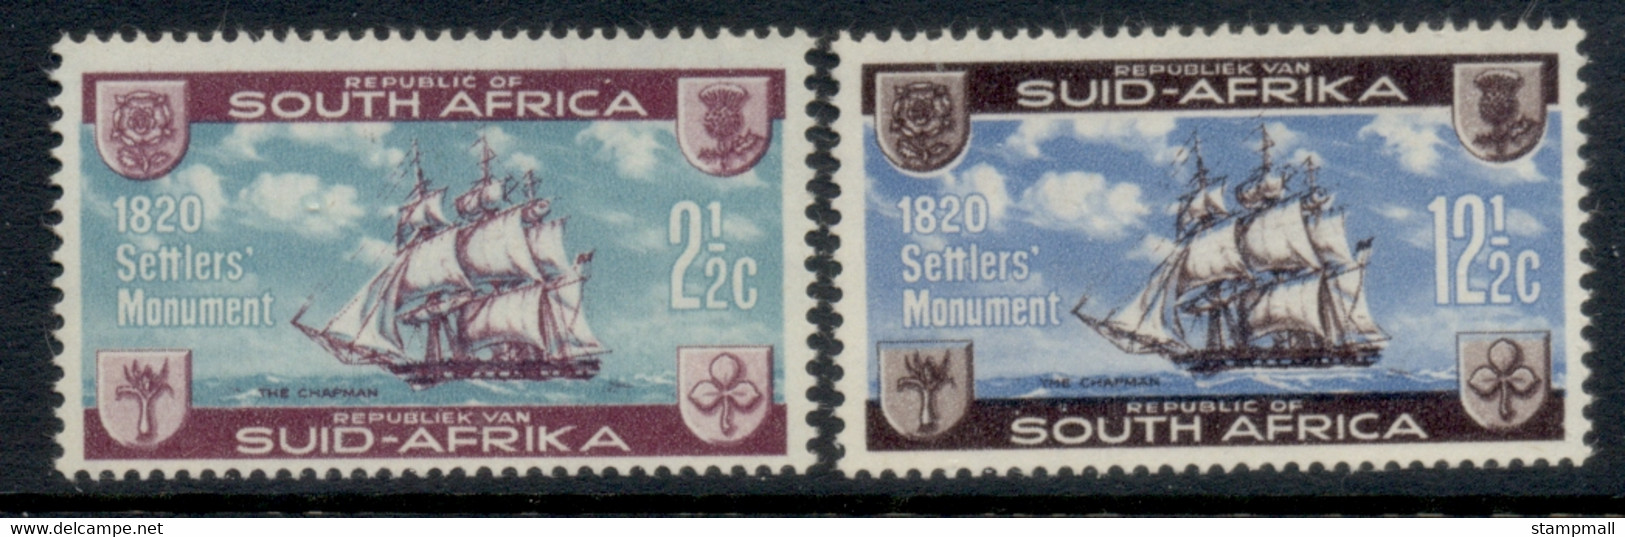 South Africa 1962 British Settlers Monument MUH - Unused Stamps